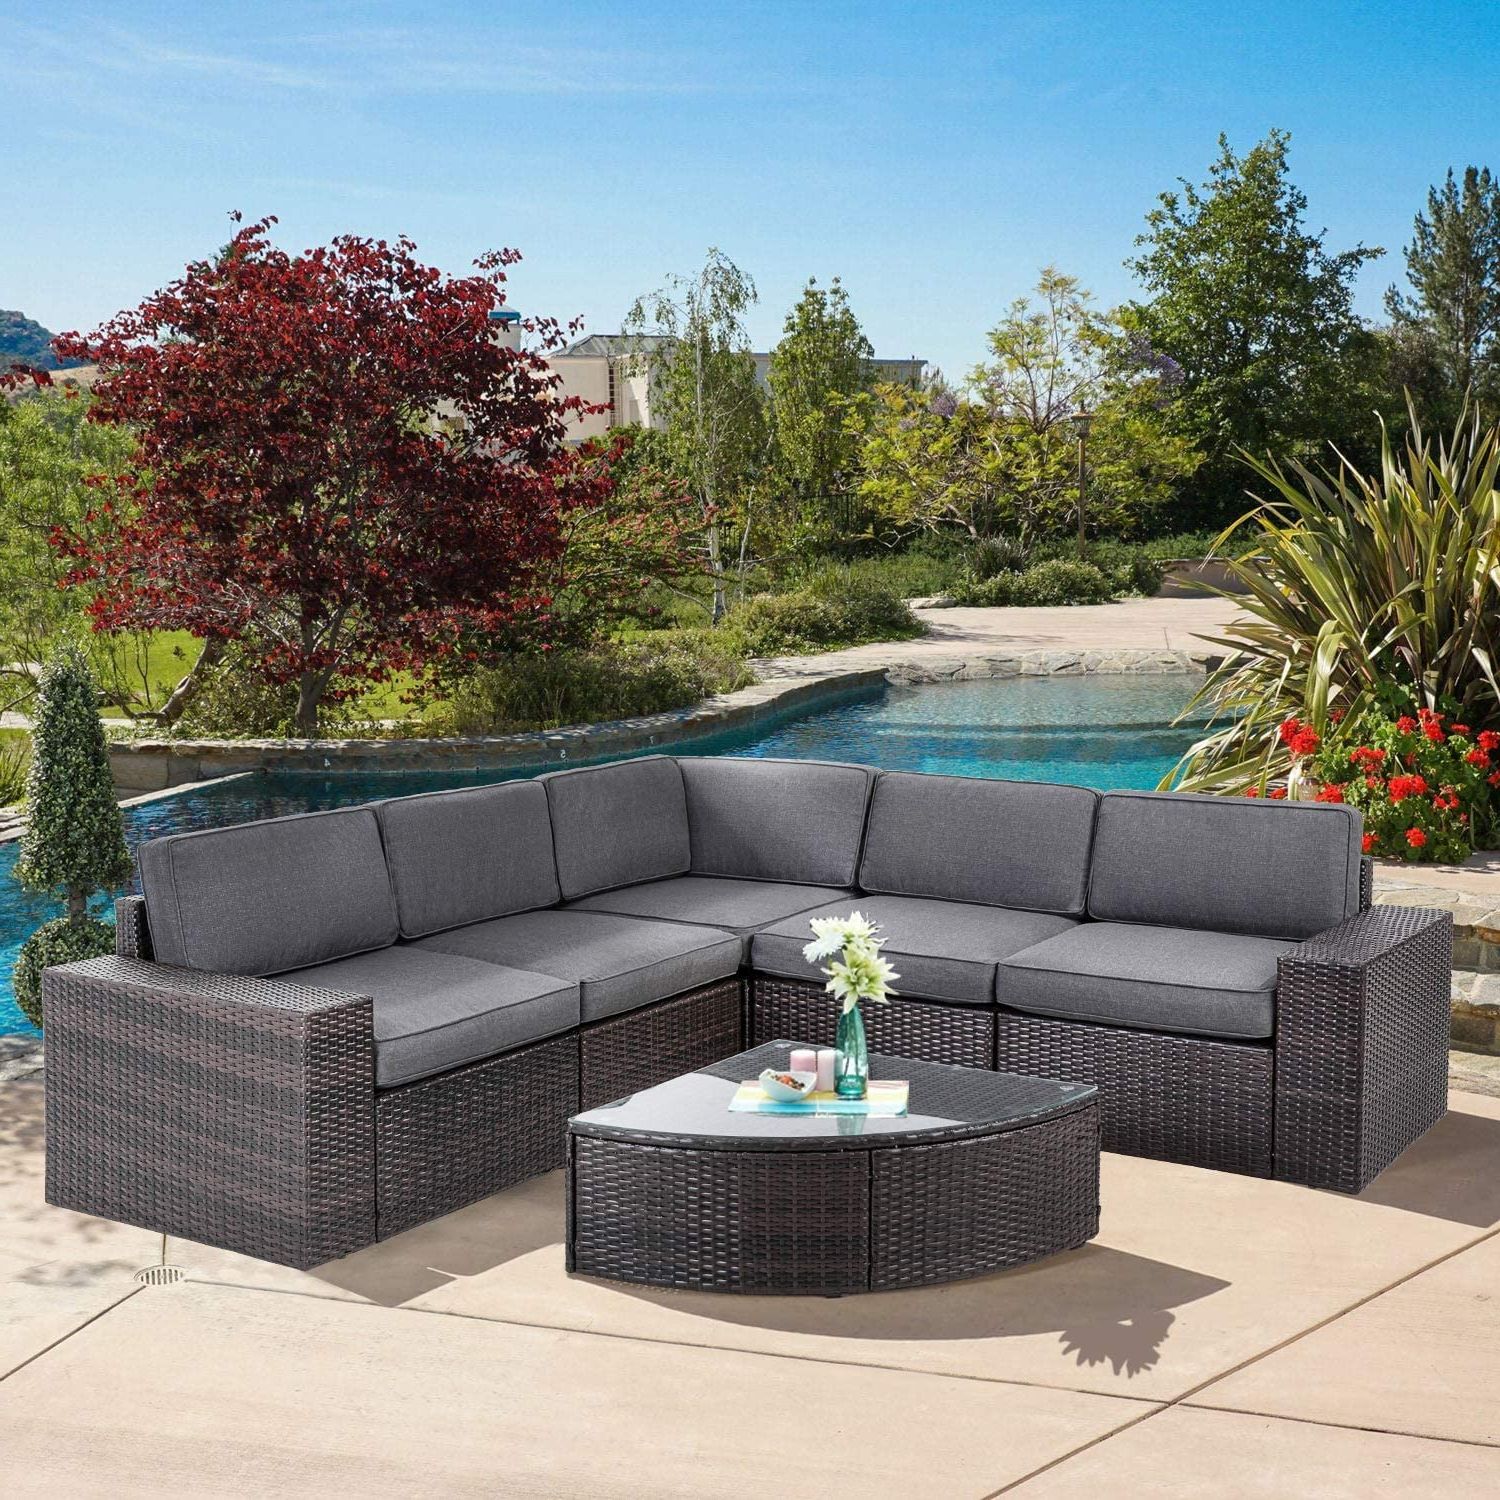 Suncrown Outdoor Furniture 6 Piece Patio Sofa And Wedge Table Set, All In 2019 Gray Outdoor Table And Loveseat Sets (View 5 of 15)